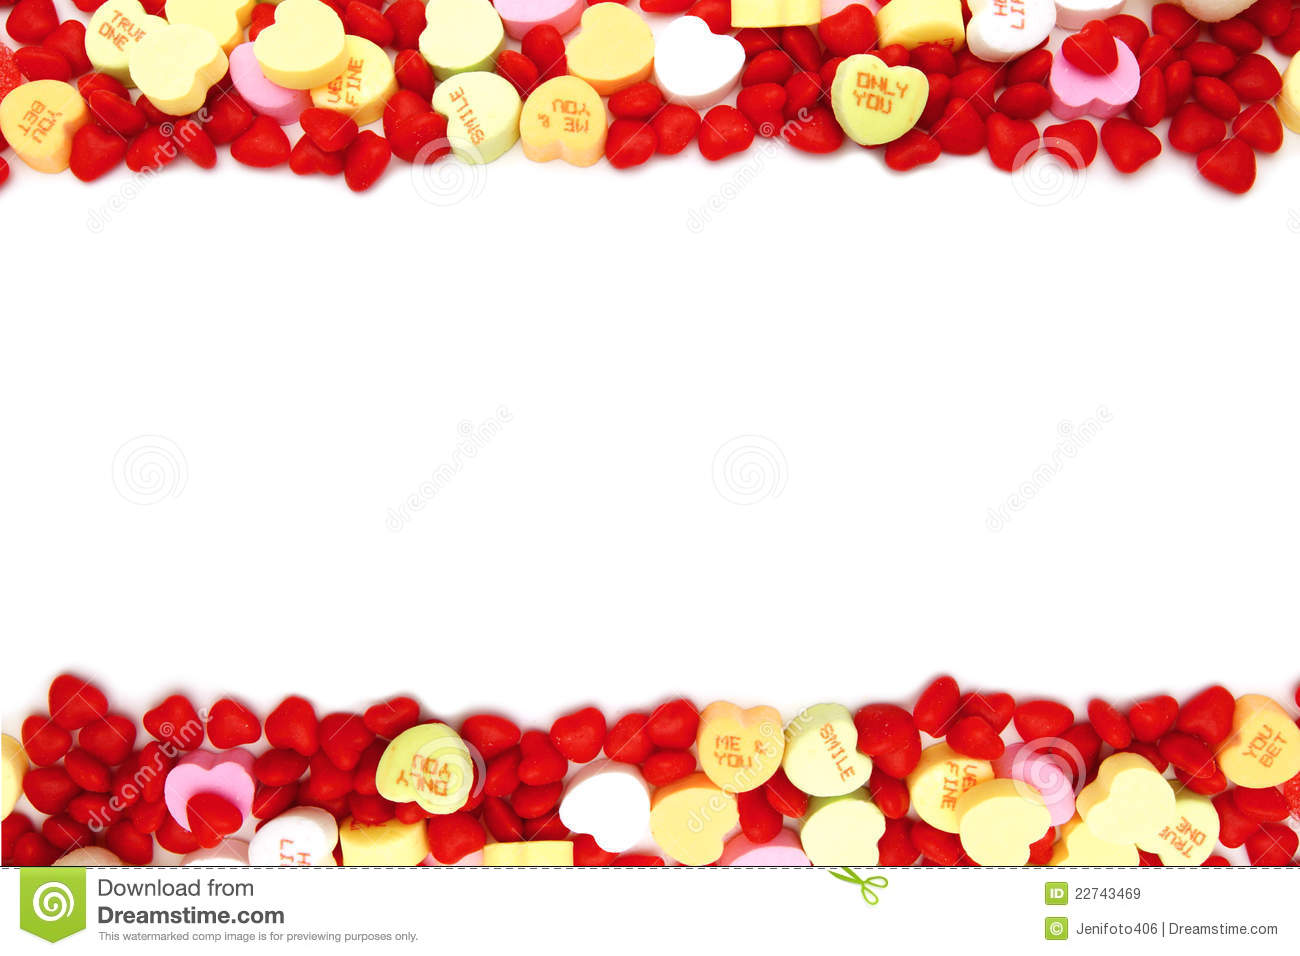 Valentines Day Candy Border Royalty Free Stock Images   Image